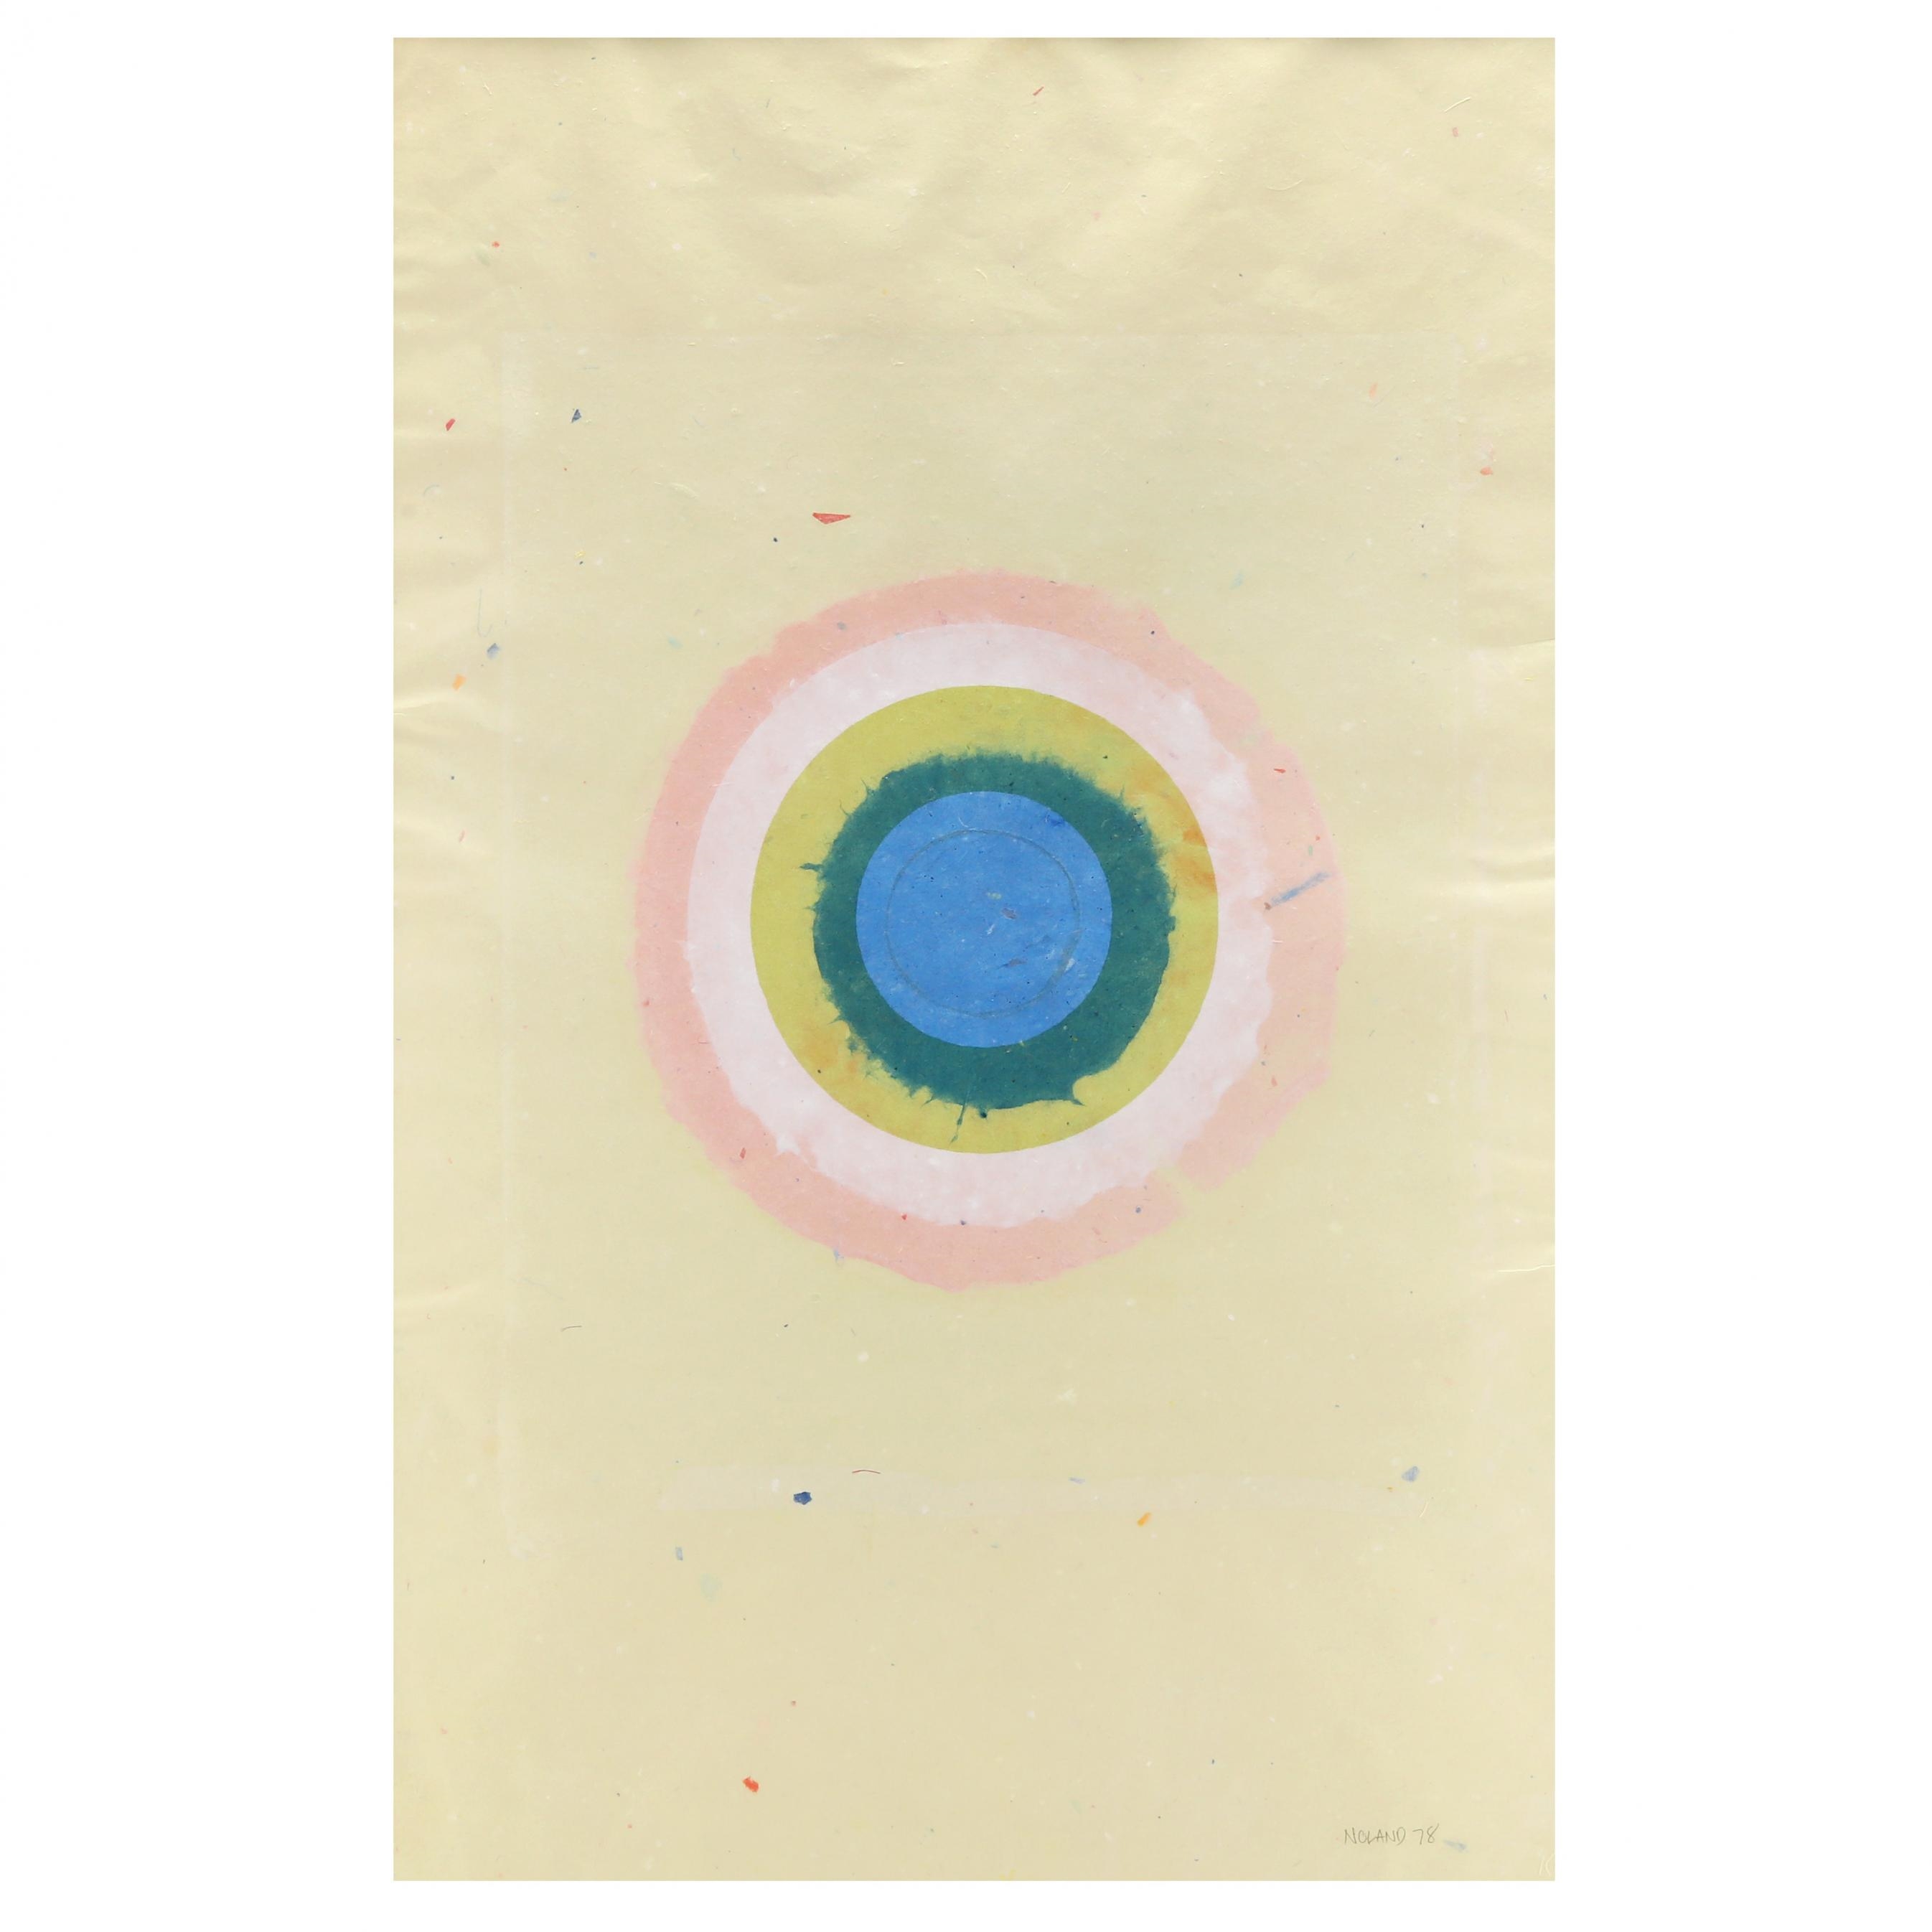 Circle III-5 (from the Handmade Paper Project) by Kenneth Noland, late 1950s. In 1960, In 1977